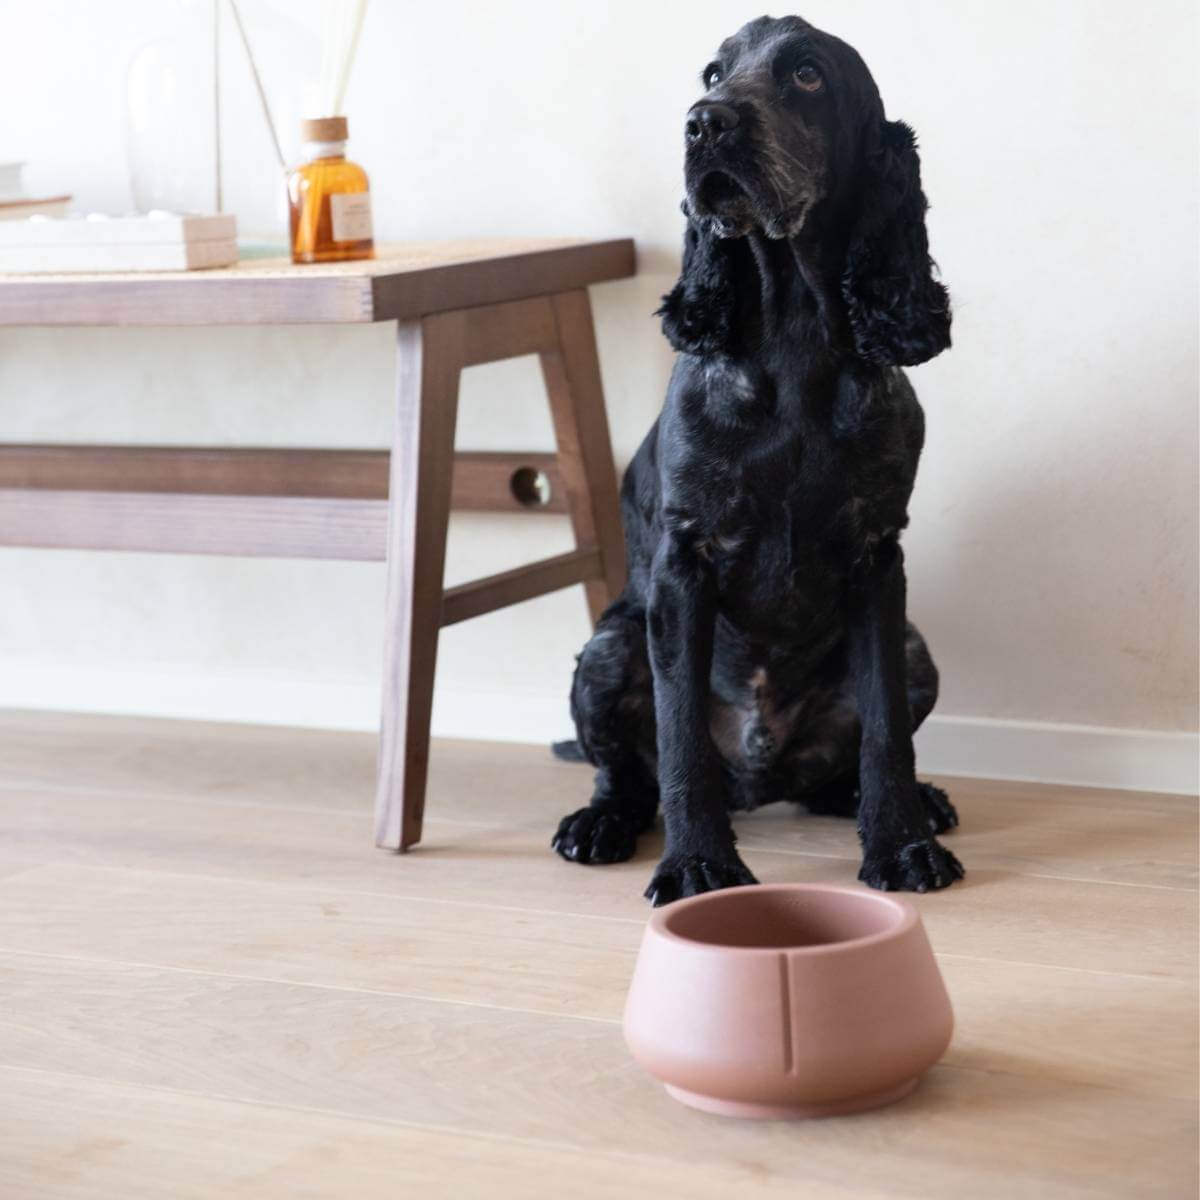 Lifestyle photo of a dog sitting next to a foxy terra long ears bowl